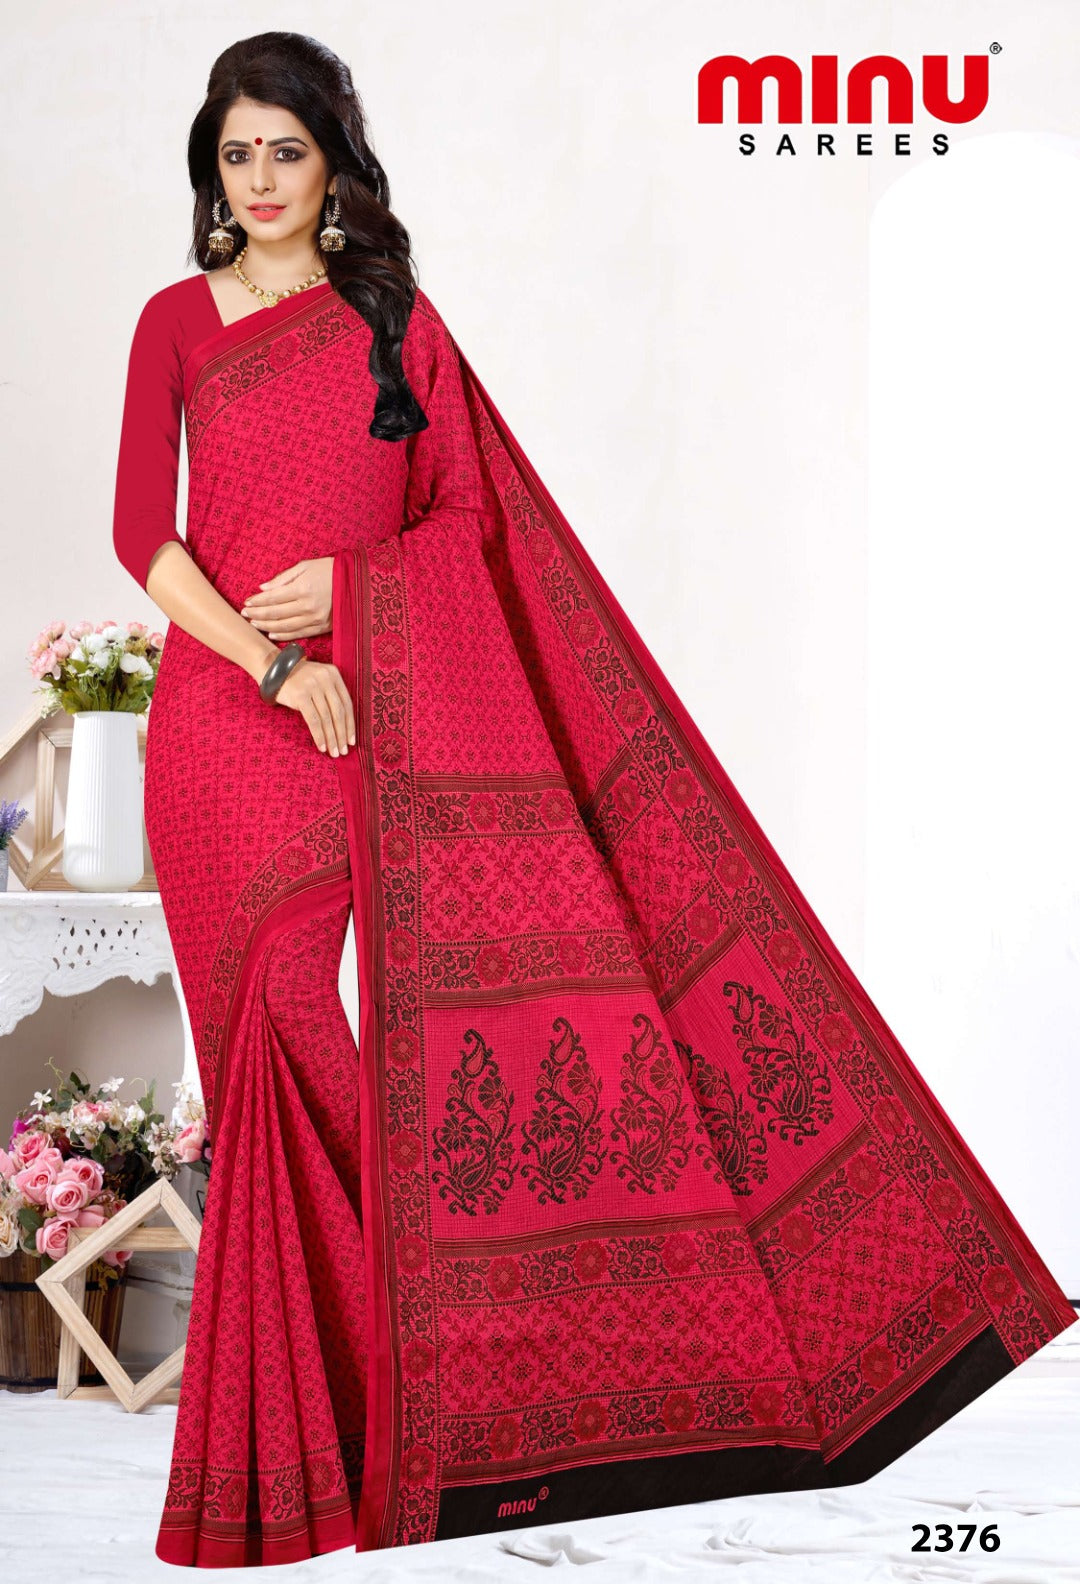 wholesale Printed Sarees in India at Best Prices